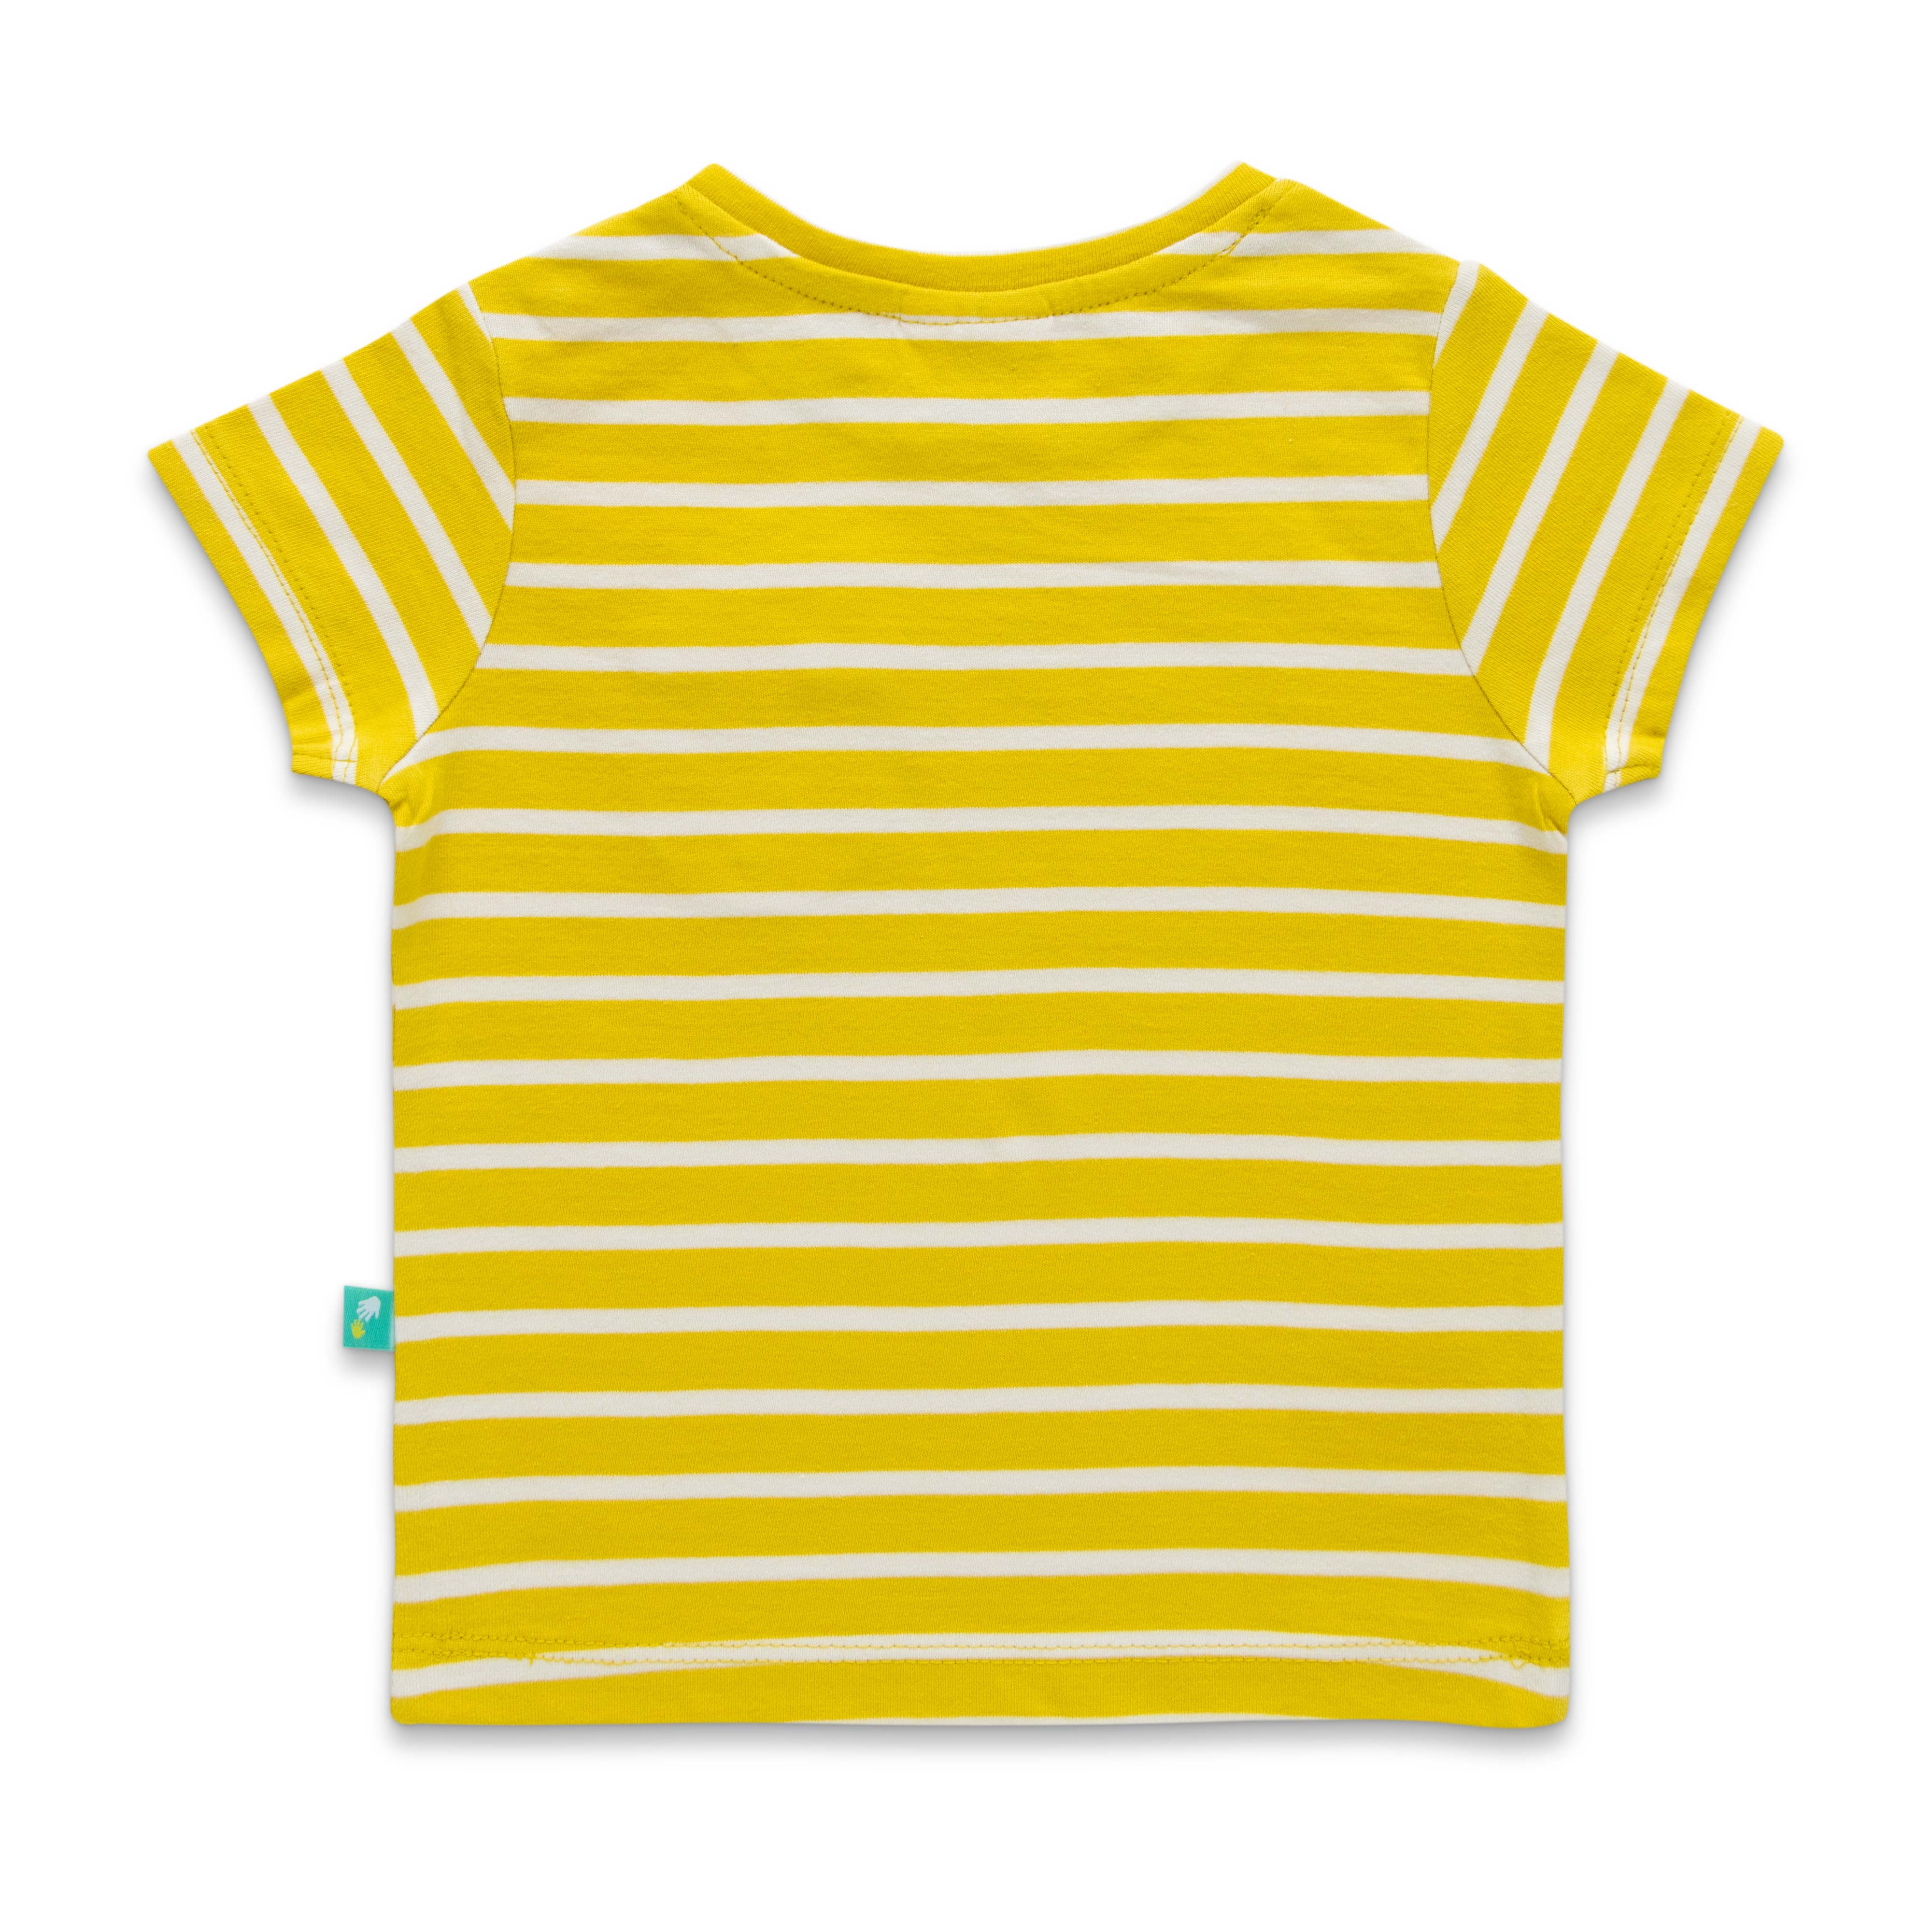 Infant Girls Striped Pure Cotton T-shirt with Shorts-Yellow & Black